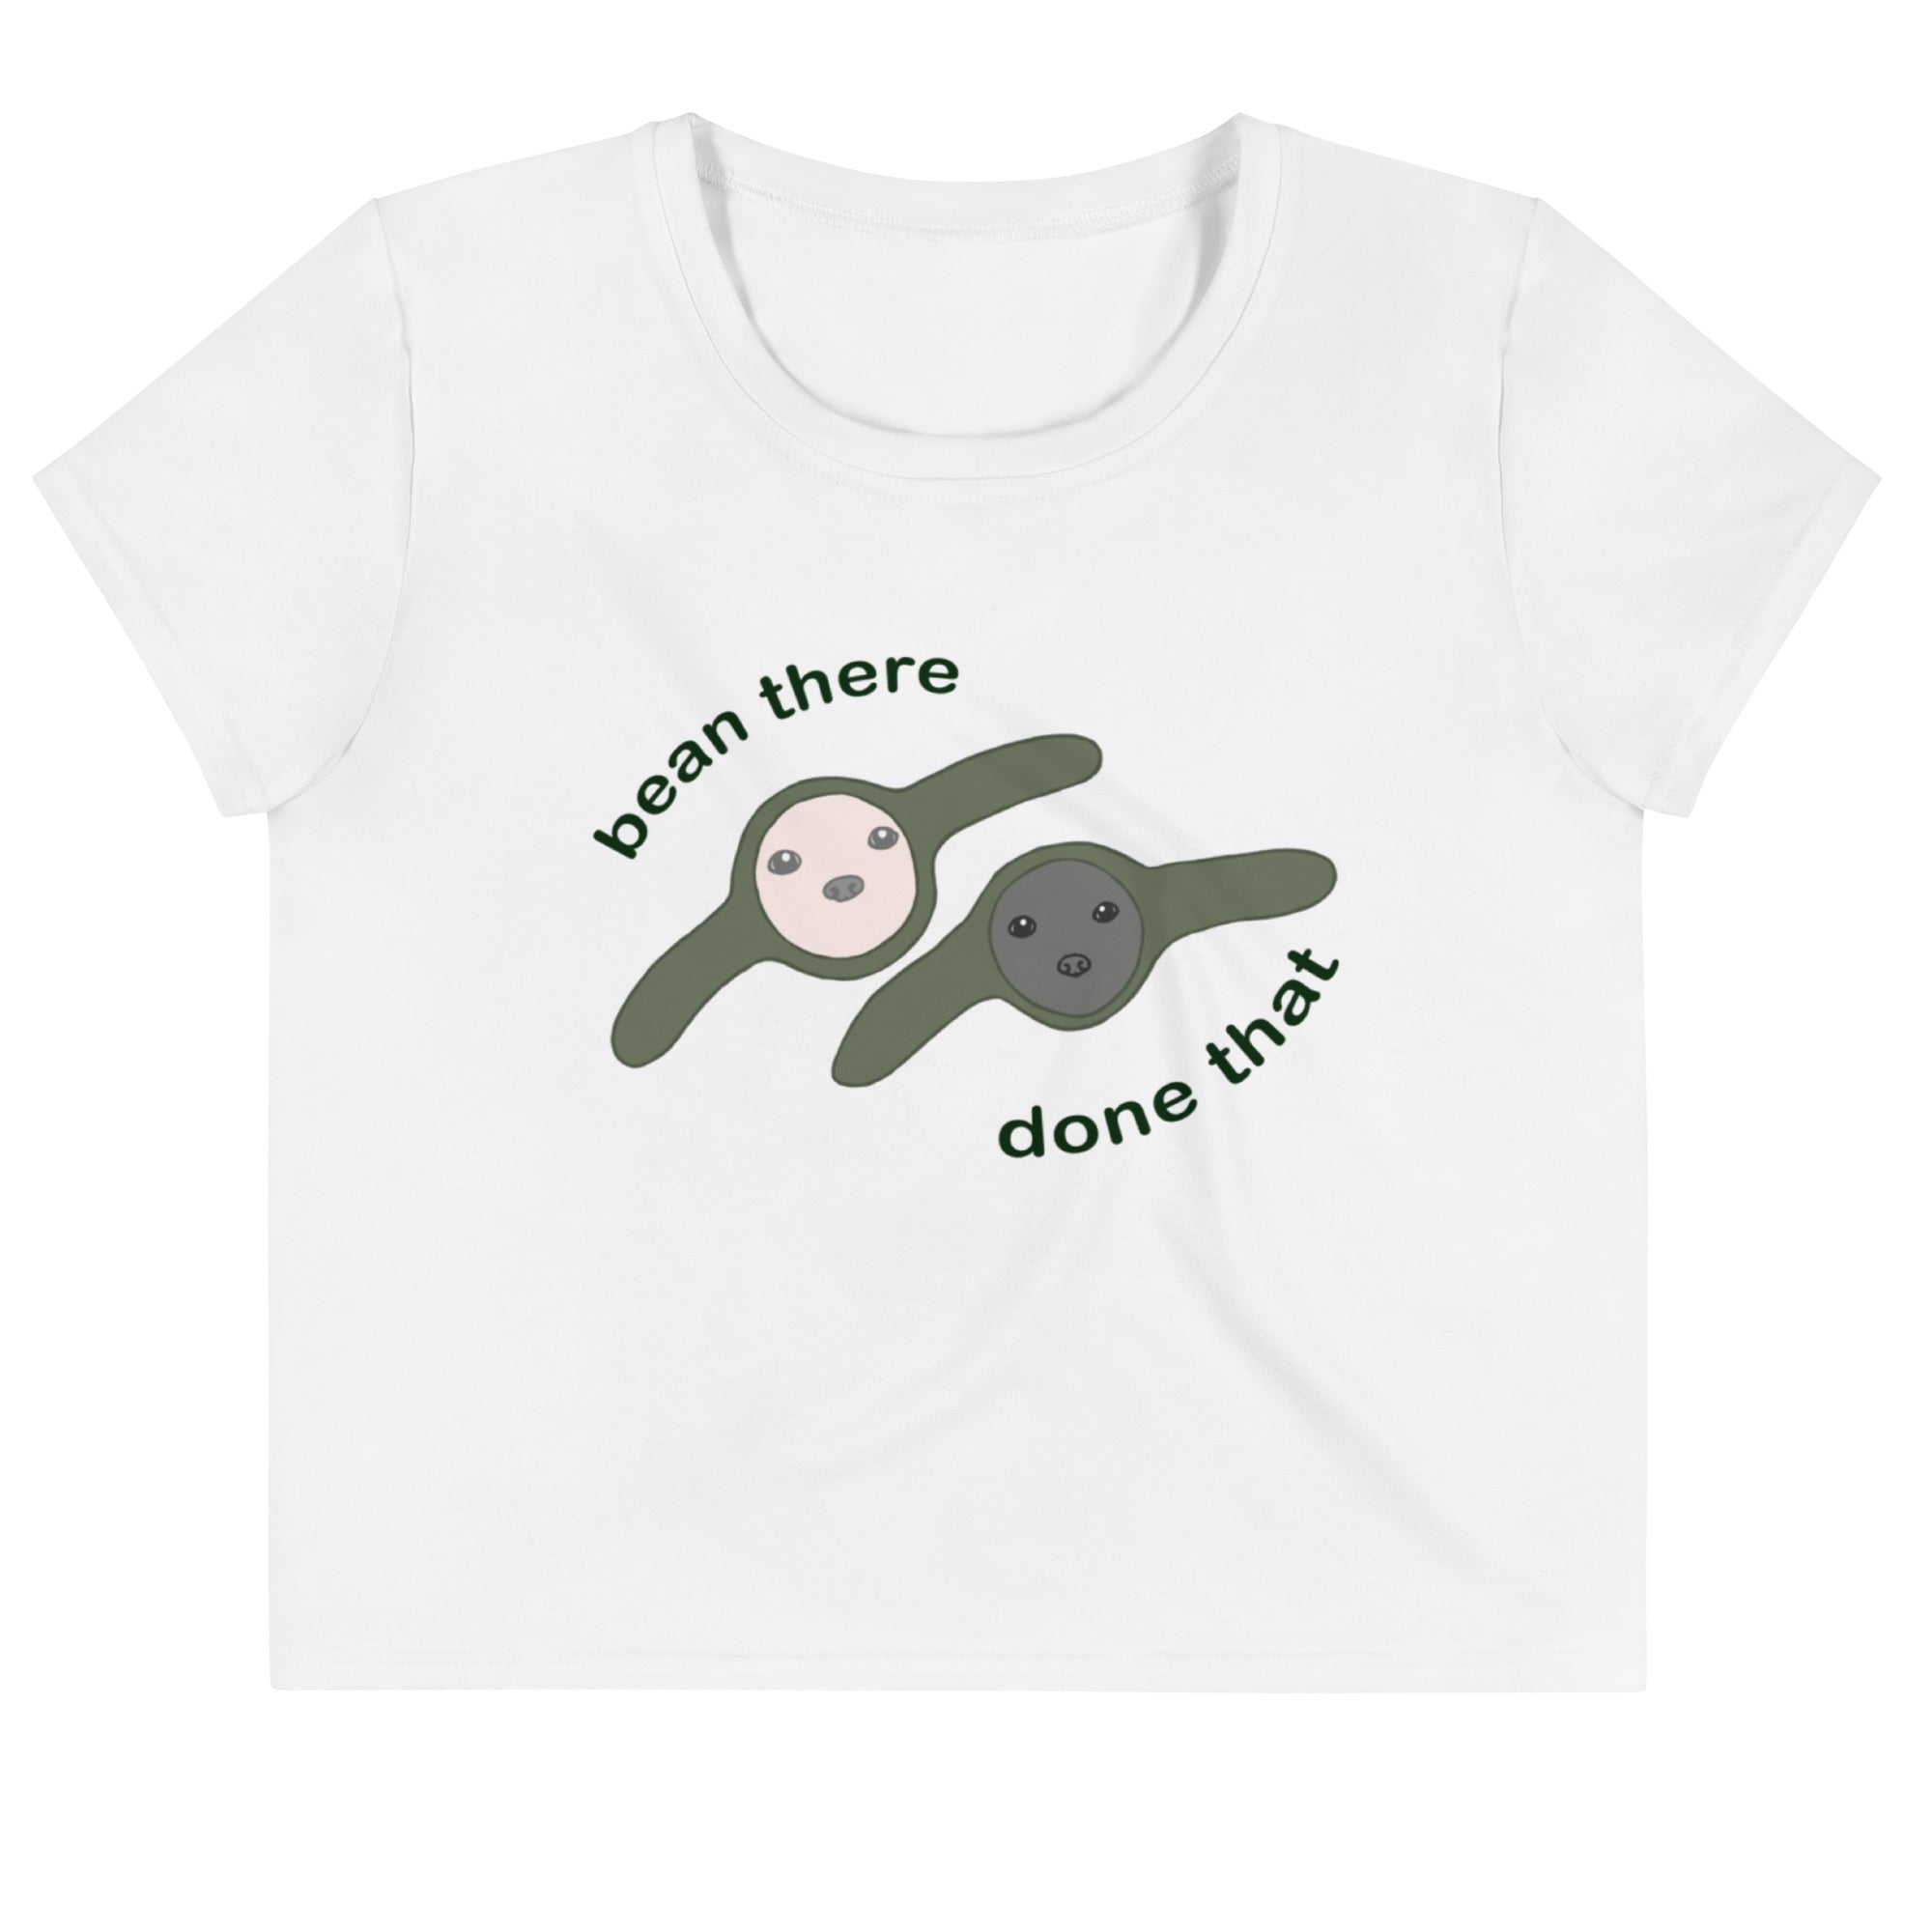 "Bean There, Done That" Adult Crop Tee